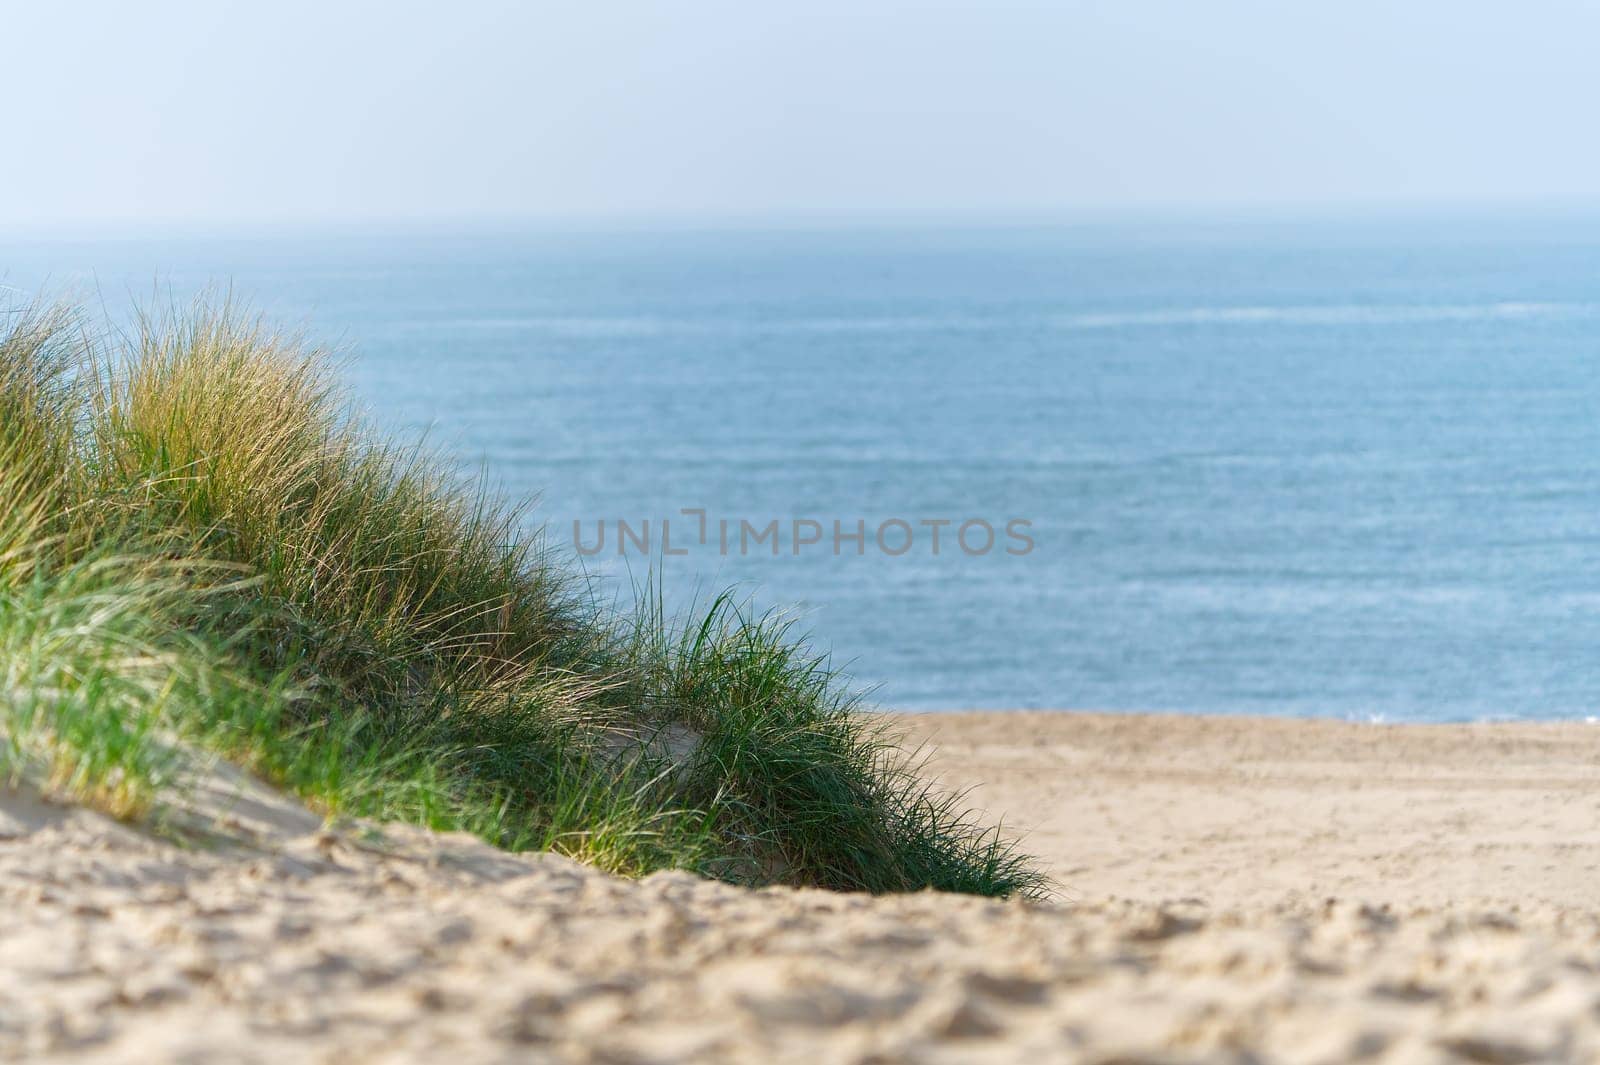 Sand dunes with marram grass and empty beach on Dutch coastline. Netherlands in overcast day. by PhotoTime